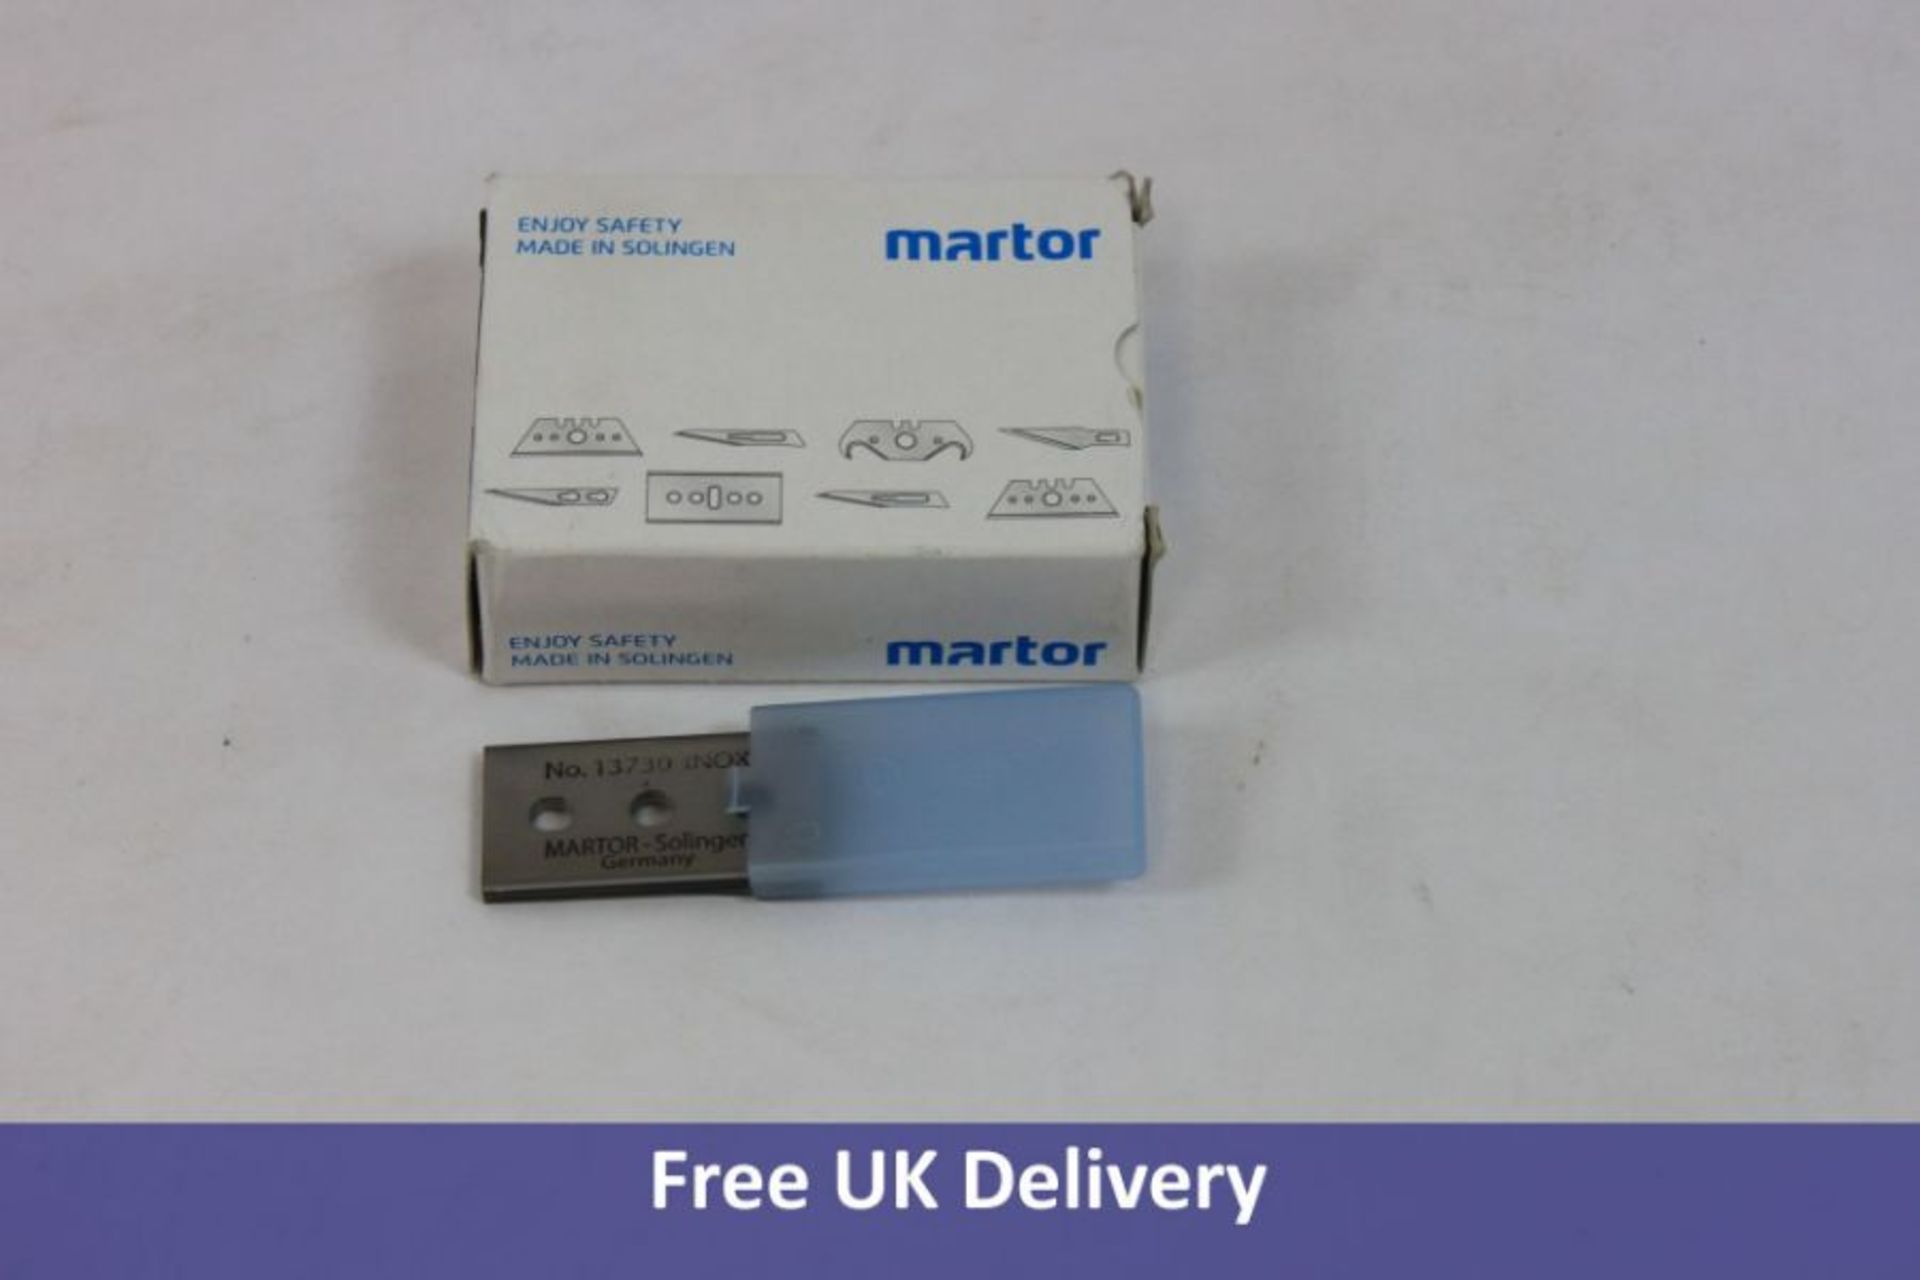 Martor Replacement Industrial Blade, Contains 100 Blades, Over 18+ Only